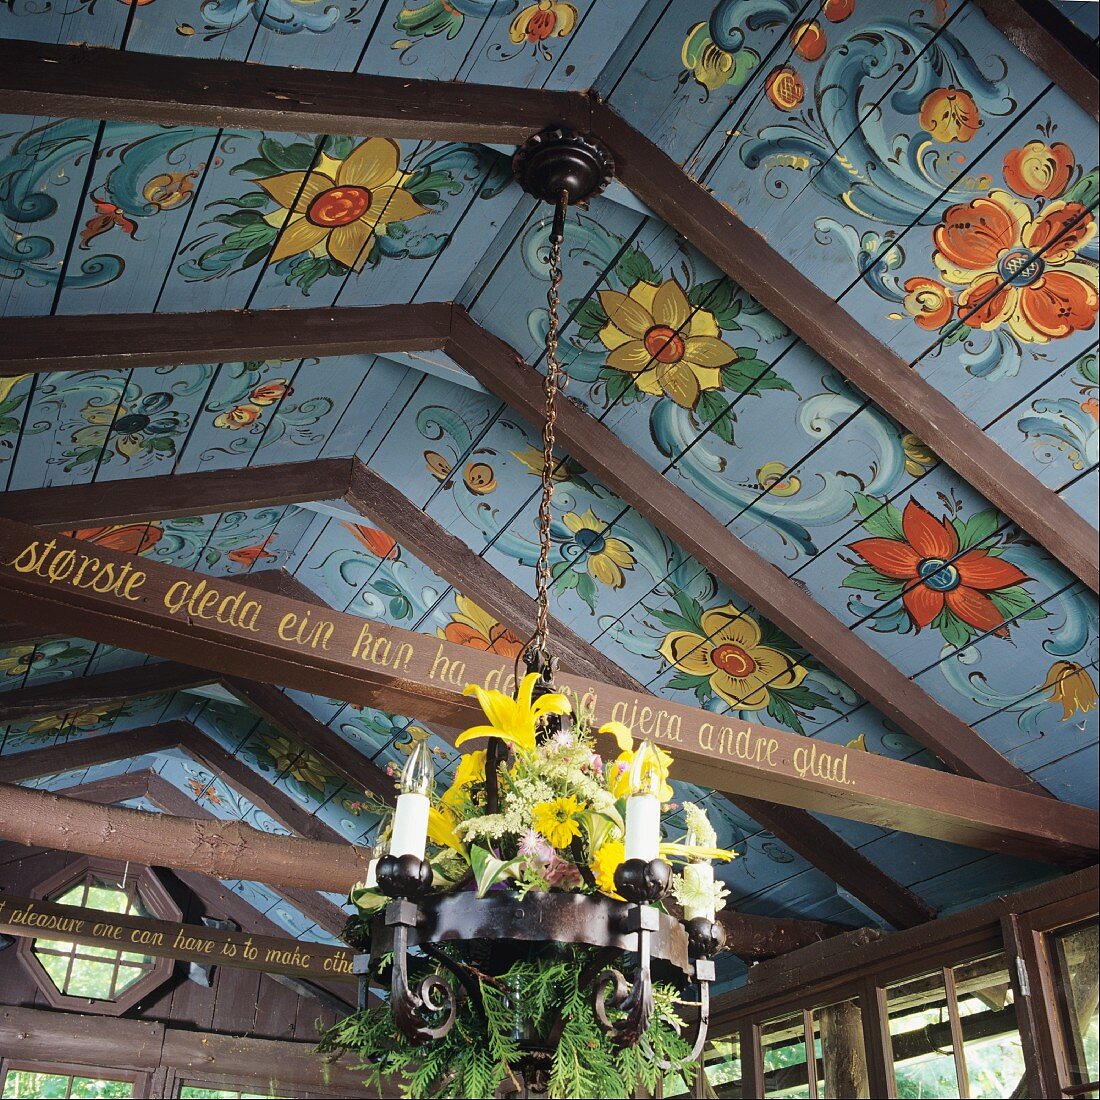 Wooden ceiling painted with Norwegian floral motifs and chandelier decorated with fresh flowers